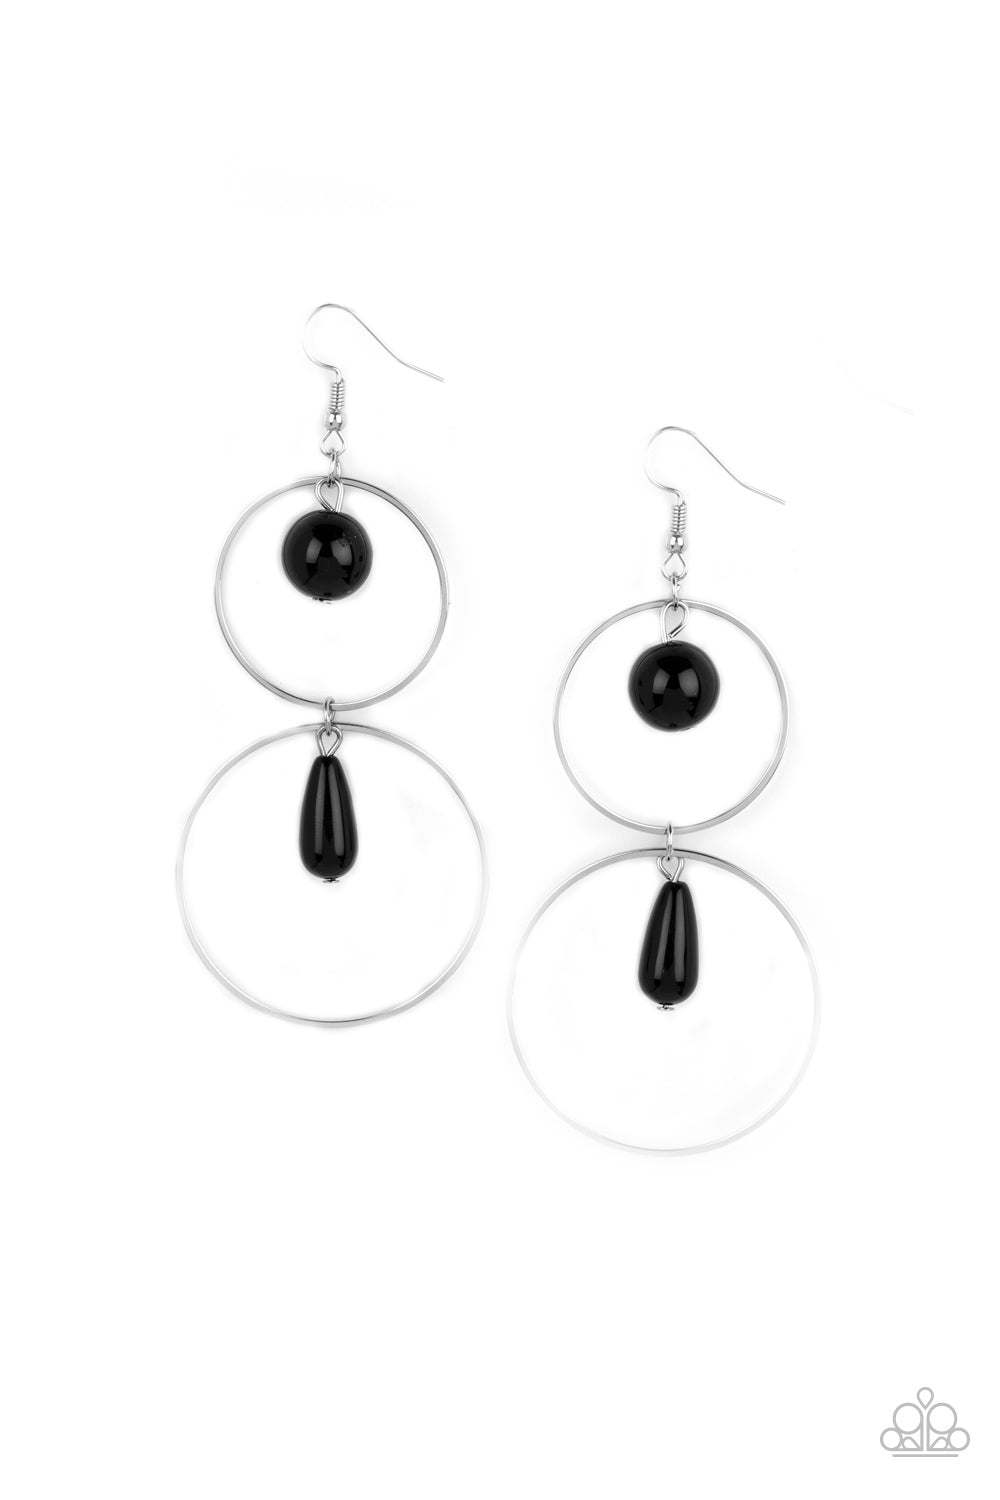 Cultured in Couture - Black Earrings - Paparazzi Accessories